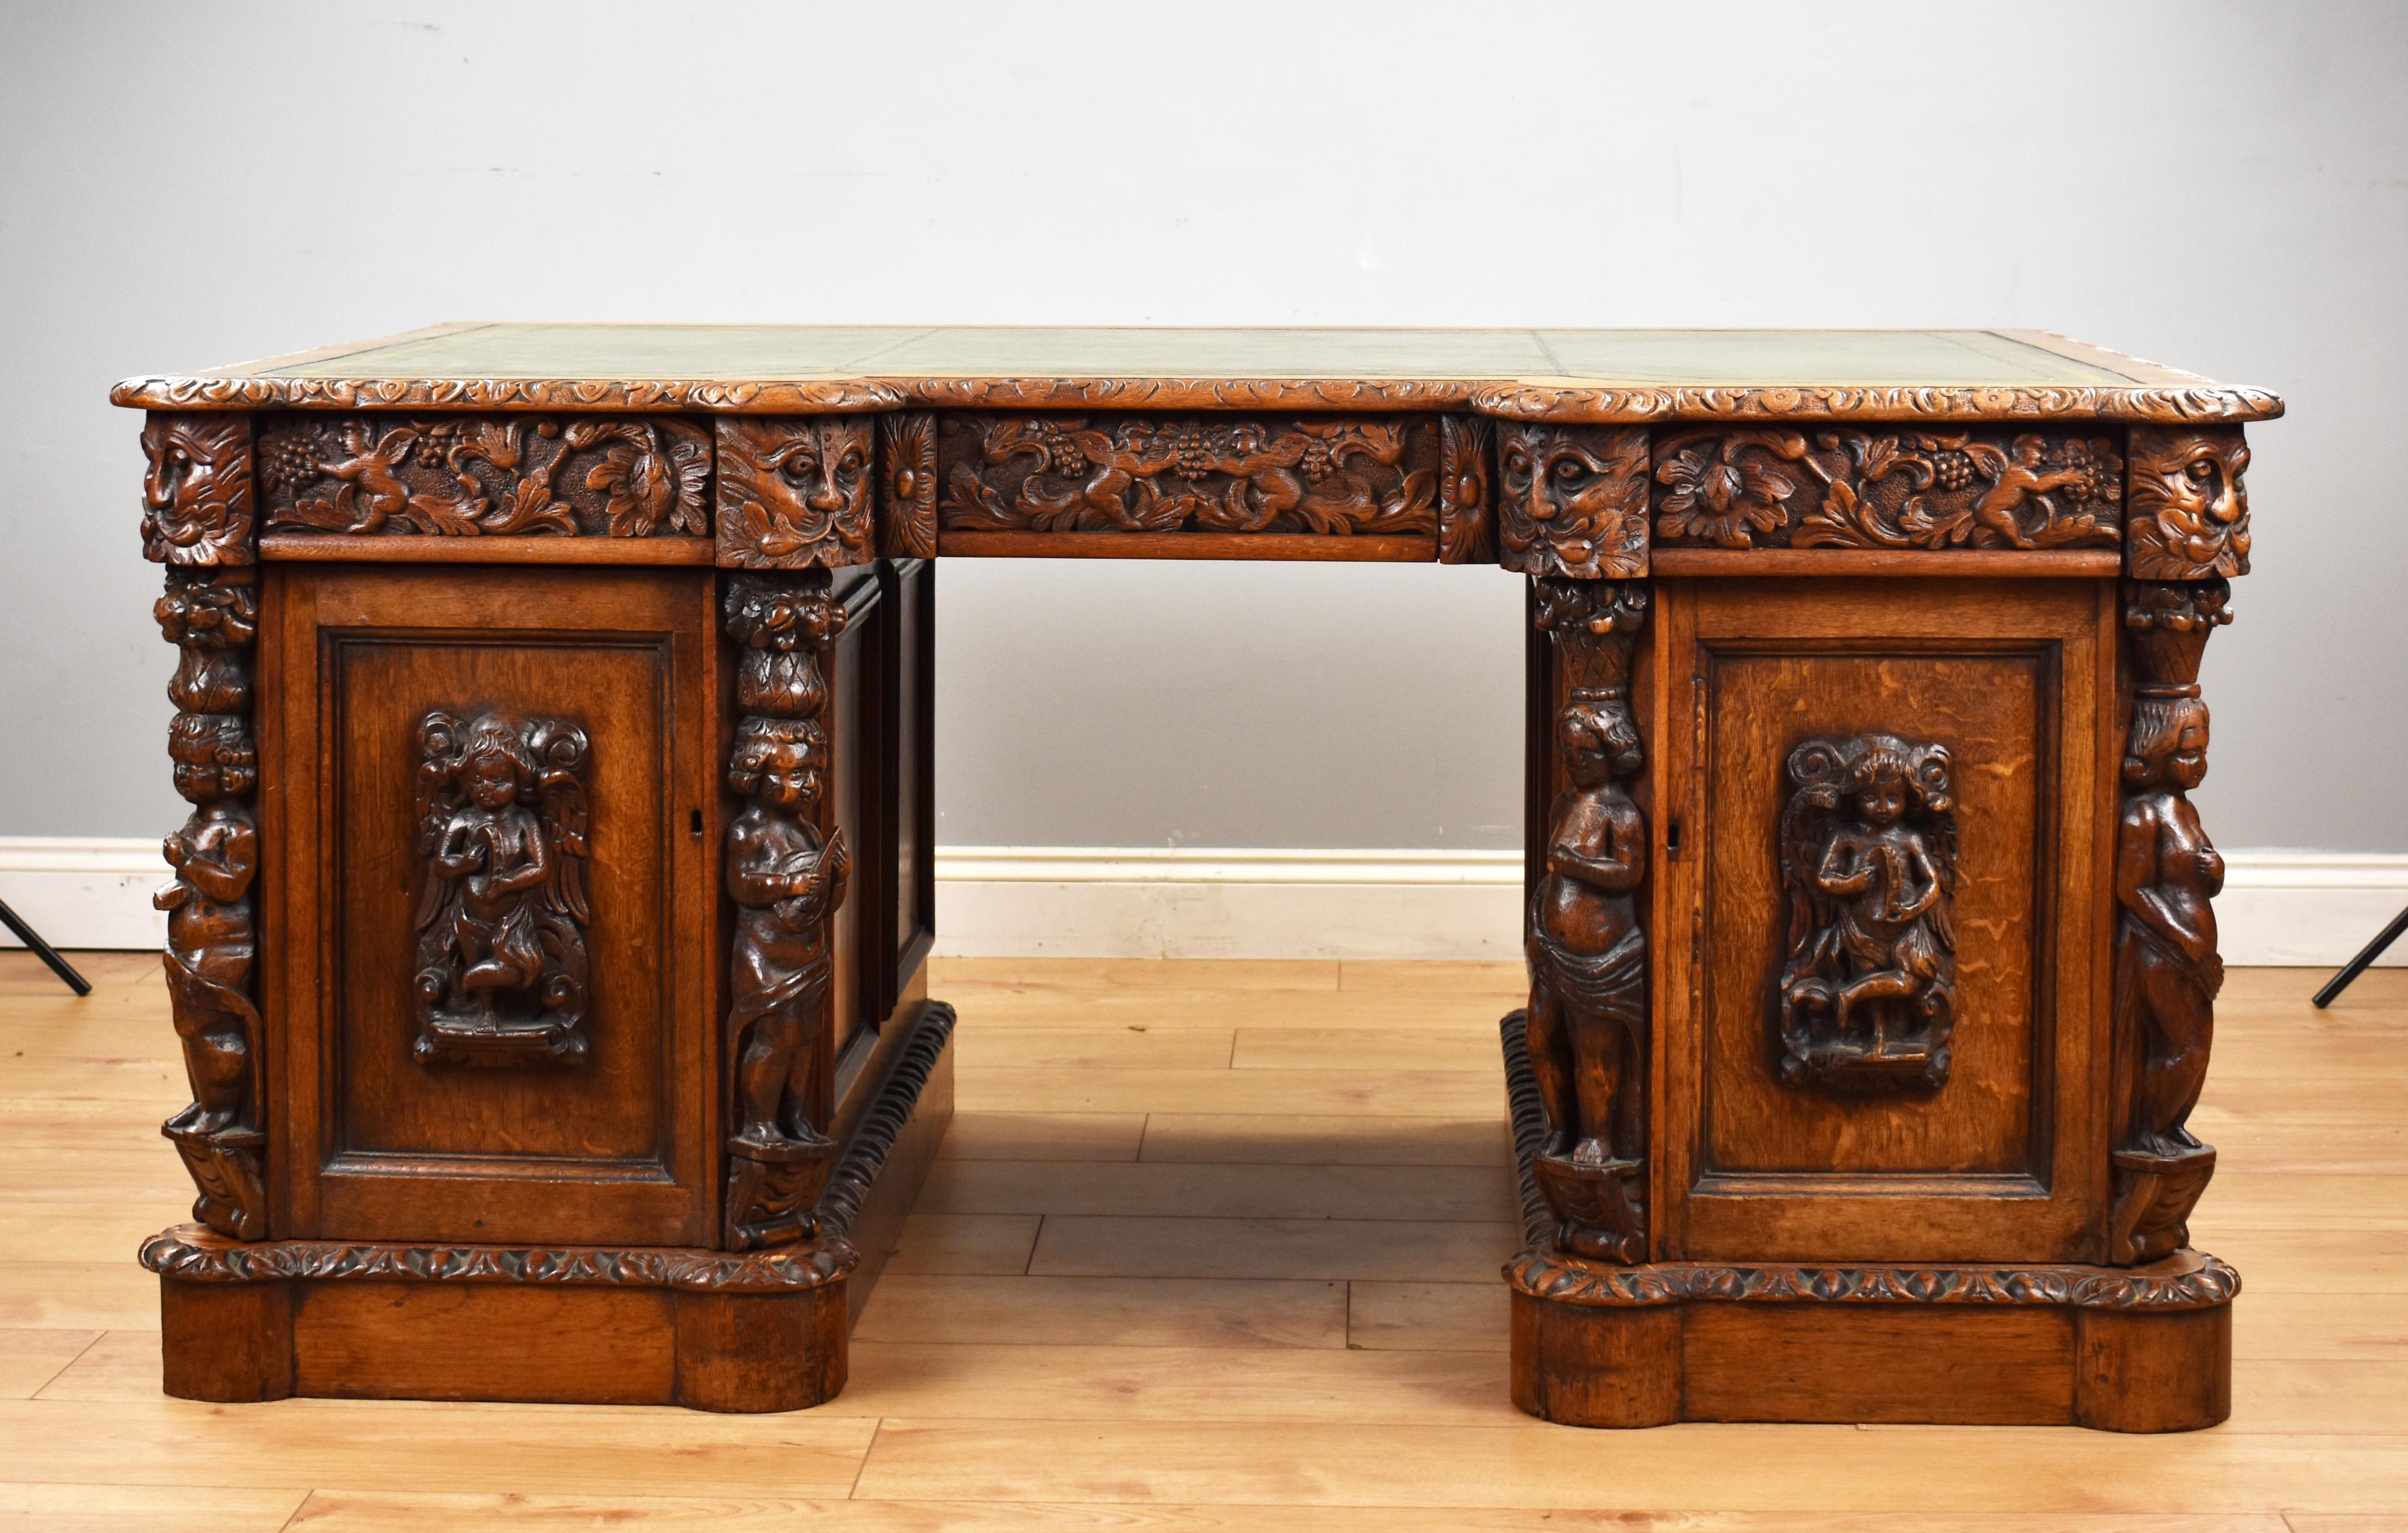 A good quality Victorian carved oak pedestal desk, inverted breakfront in form, the desk has inset leather top, above three intricately carved drawers. The top fits onto two pedestals, each with ornately carved cherubs, and carved panel doors,